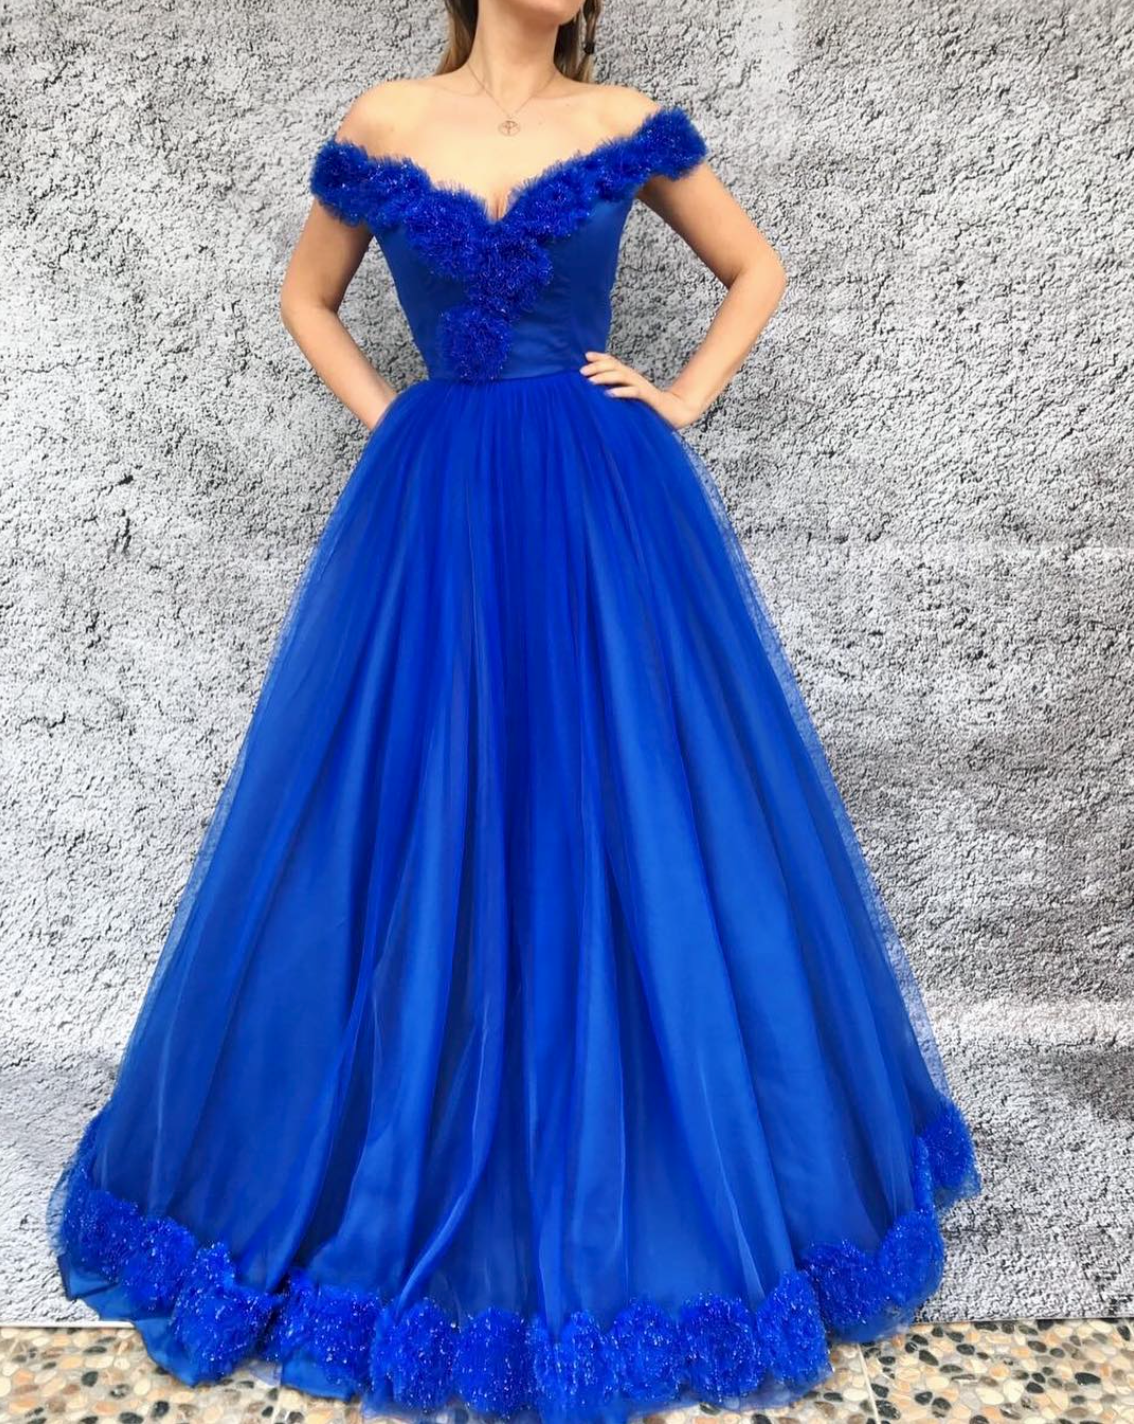 Blue A-Line dress with off the shoulder sleeves and embroidery